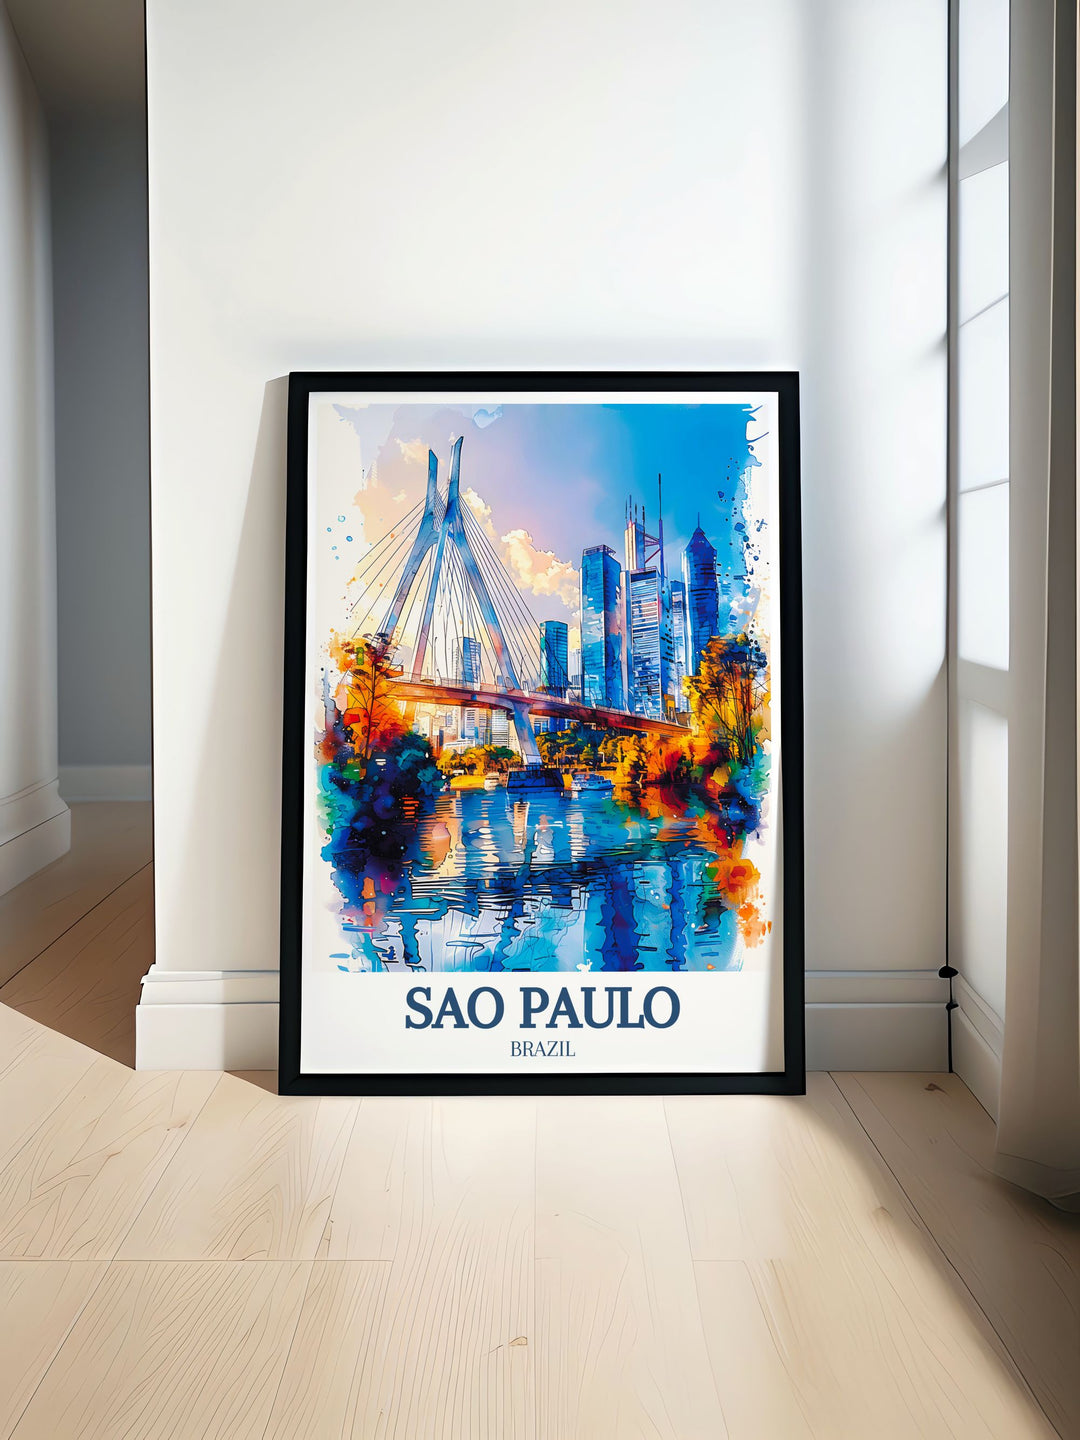 Elegant wall art of Sao Paulo featuring the Octávio Frias de Oliveira Bridge, perfect for adding a touch of urban sophistication to your home decor.